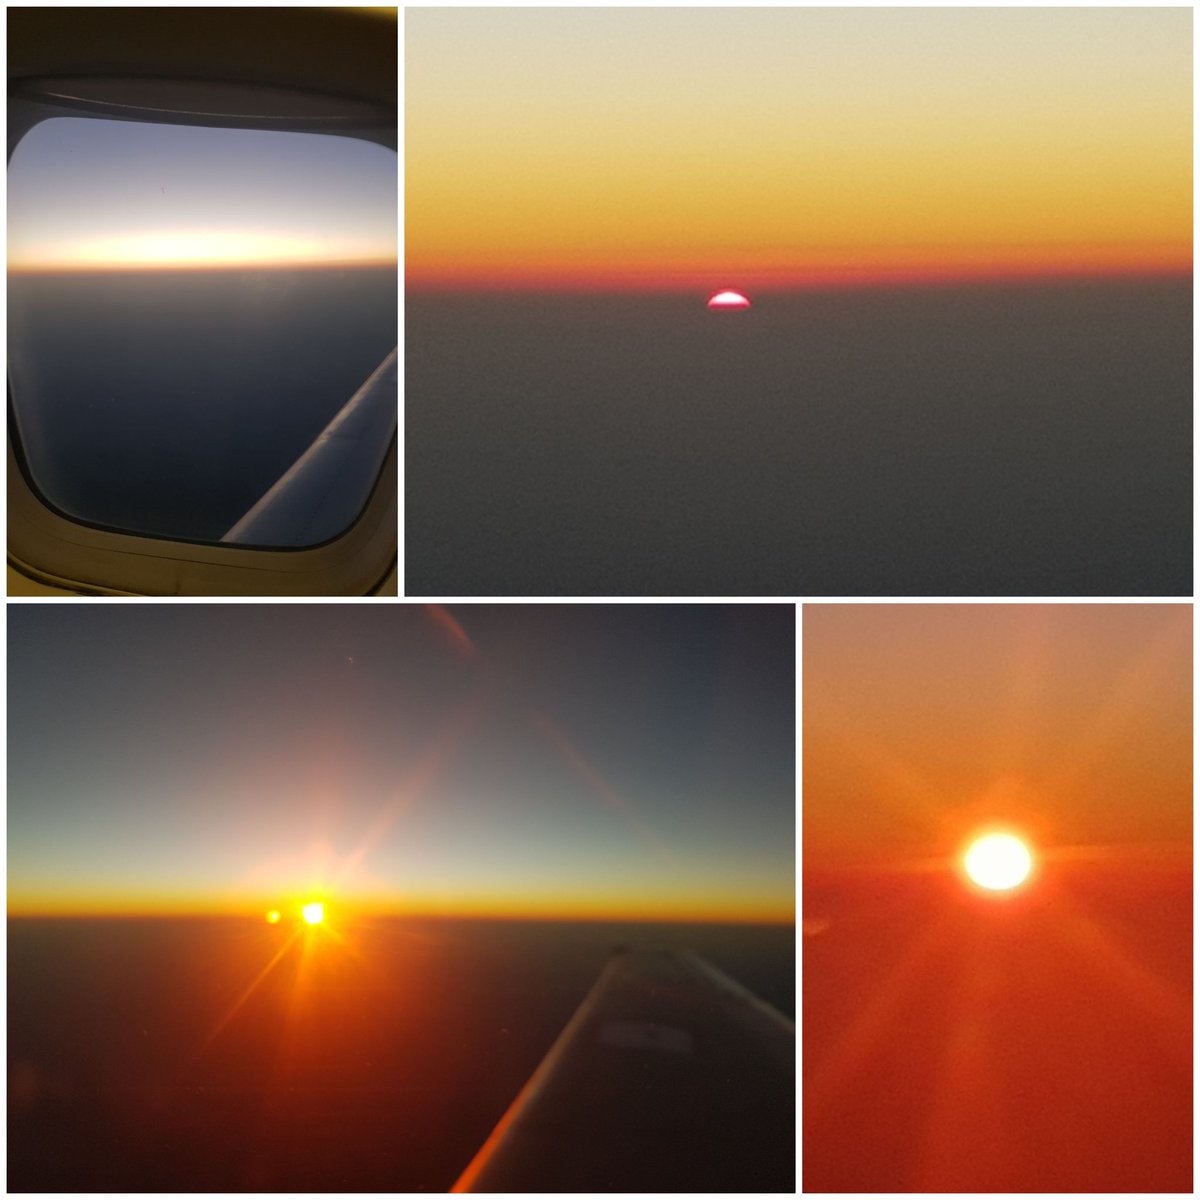 Namibian sunrise from a plane. Worth getting up early for. #lovingnamibia